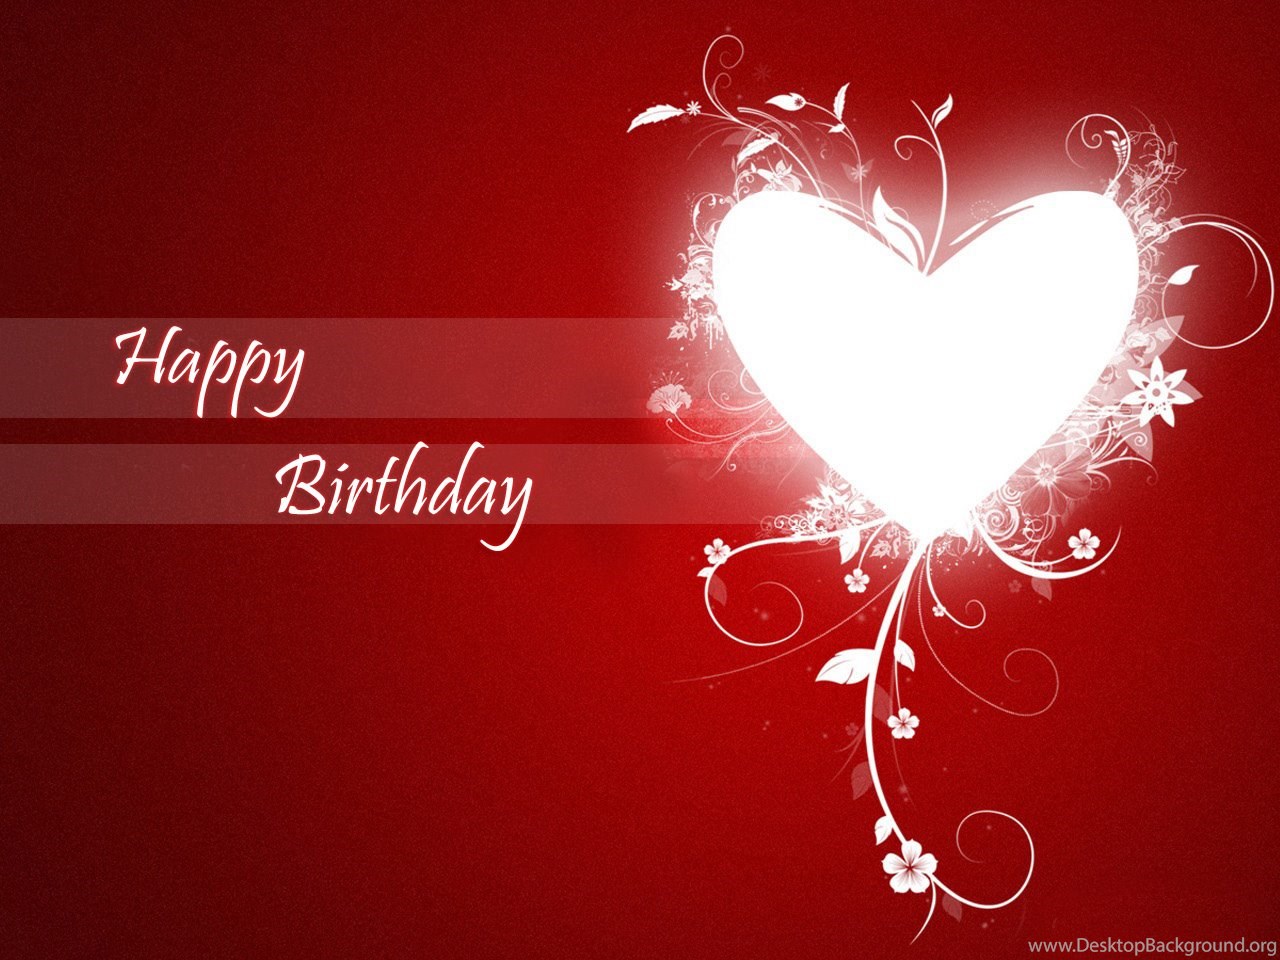 birthday wishes wallpaper for lover,heart,love,valentine's day,red,text